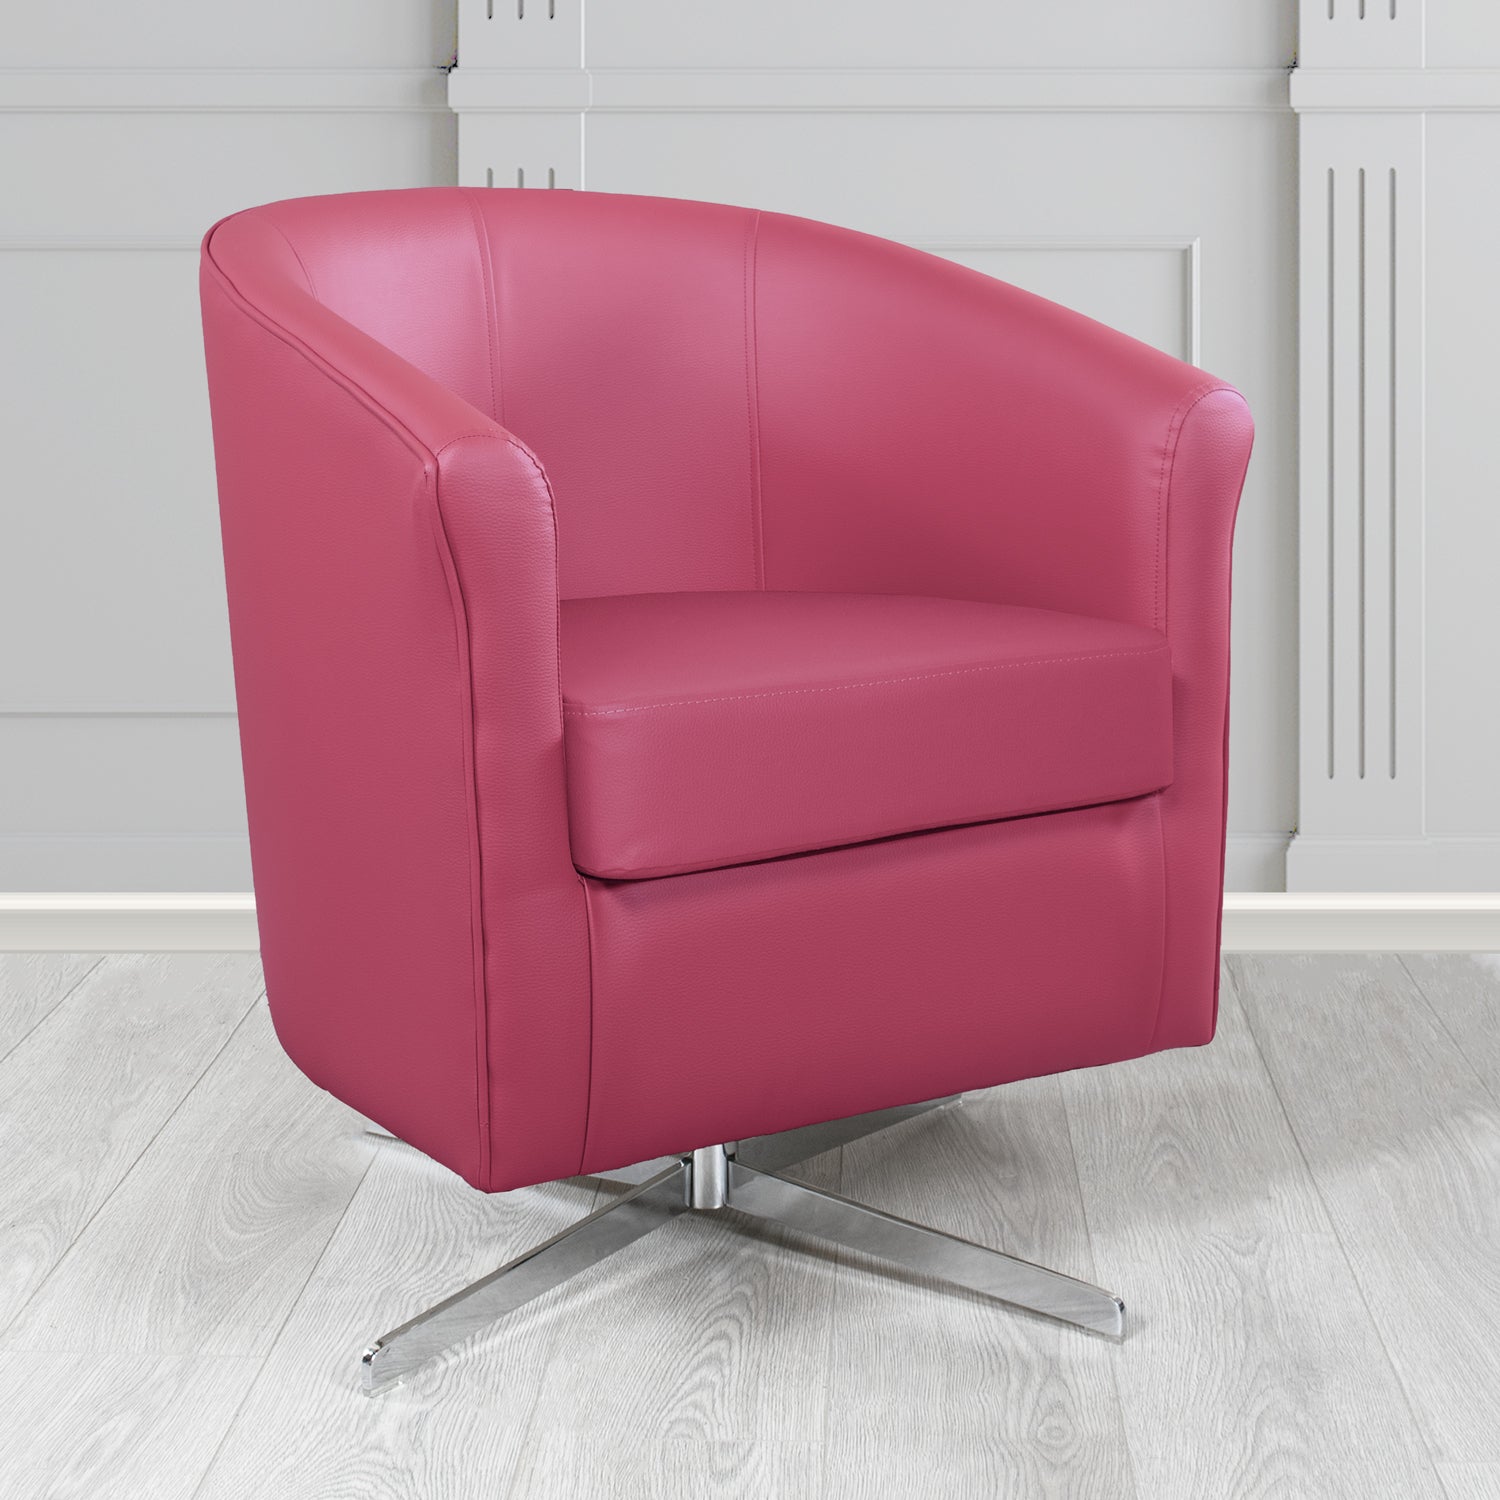 Cannes Swivel Tub Chair in Just Colour Deep Rose Crib 5 Faux Leather - The Tub Chair Shop